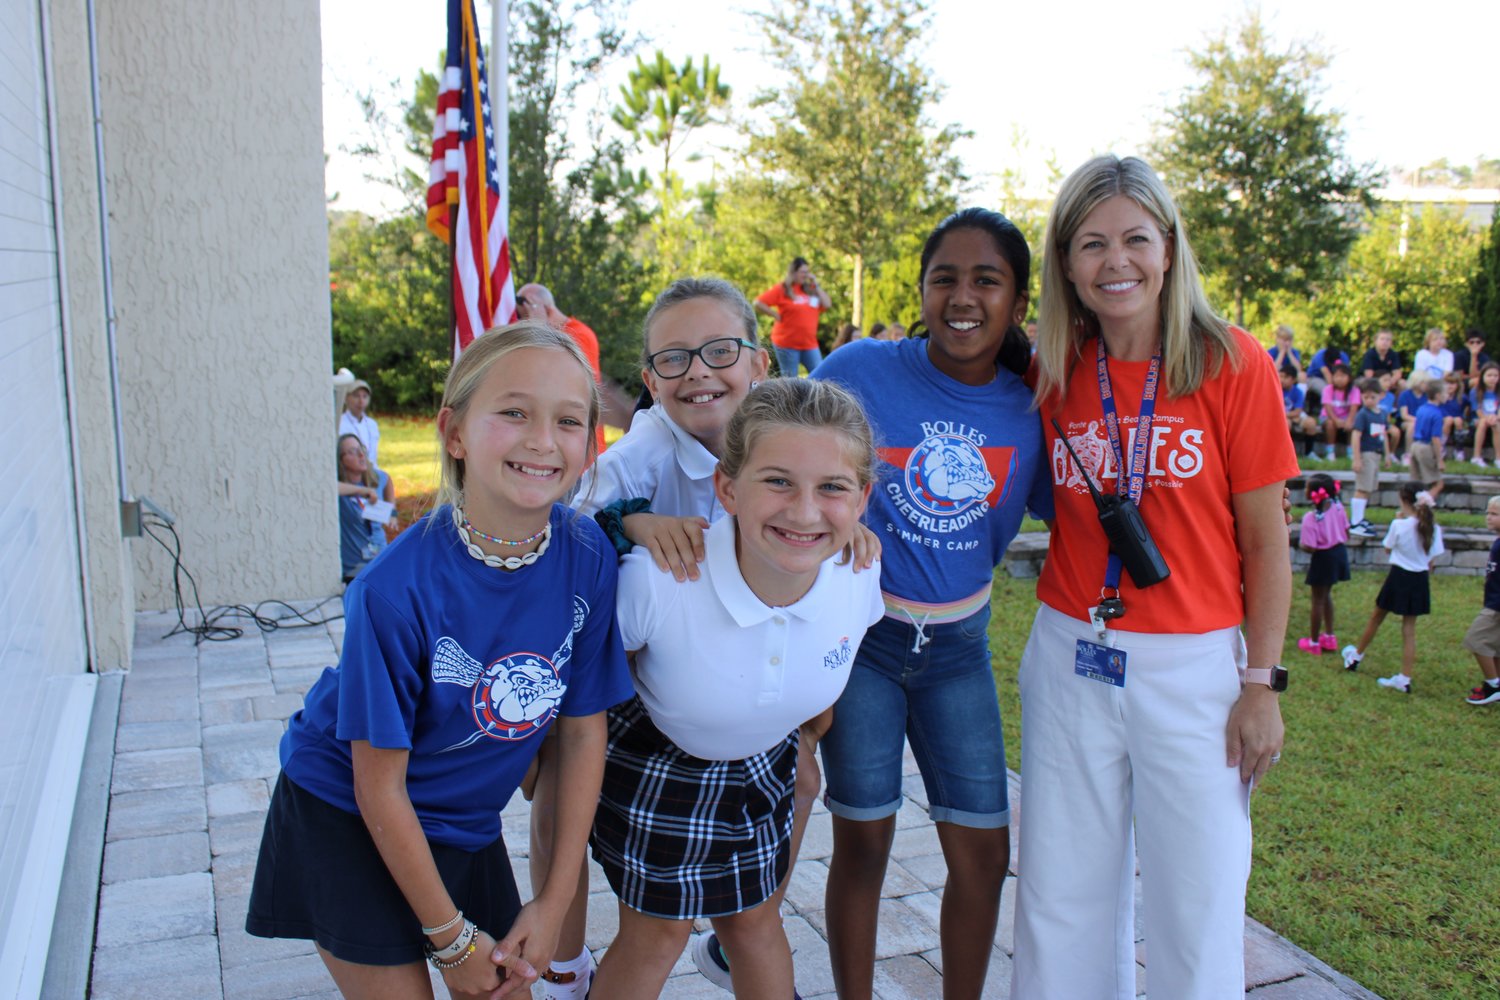 Bolles Lower School Ponte Vedra Beach Campus Head of School Stacey Hendershot is seen with a group of happy students.